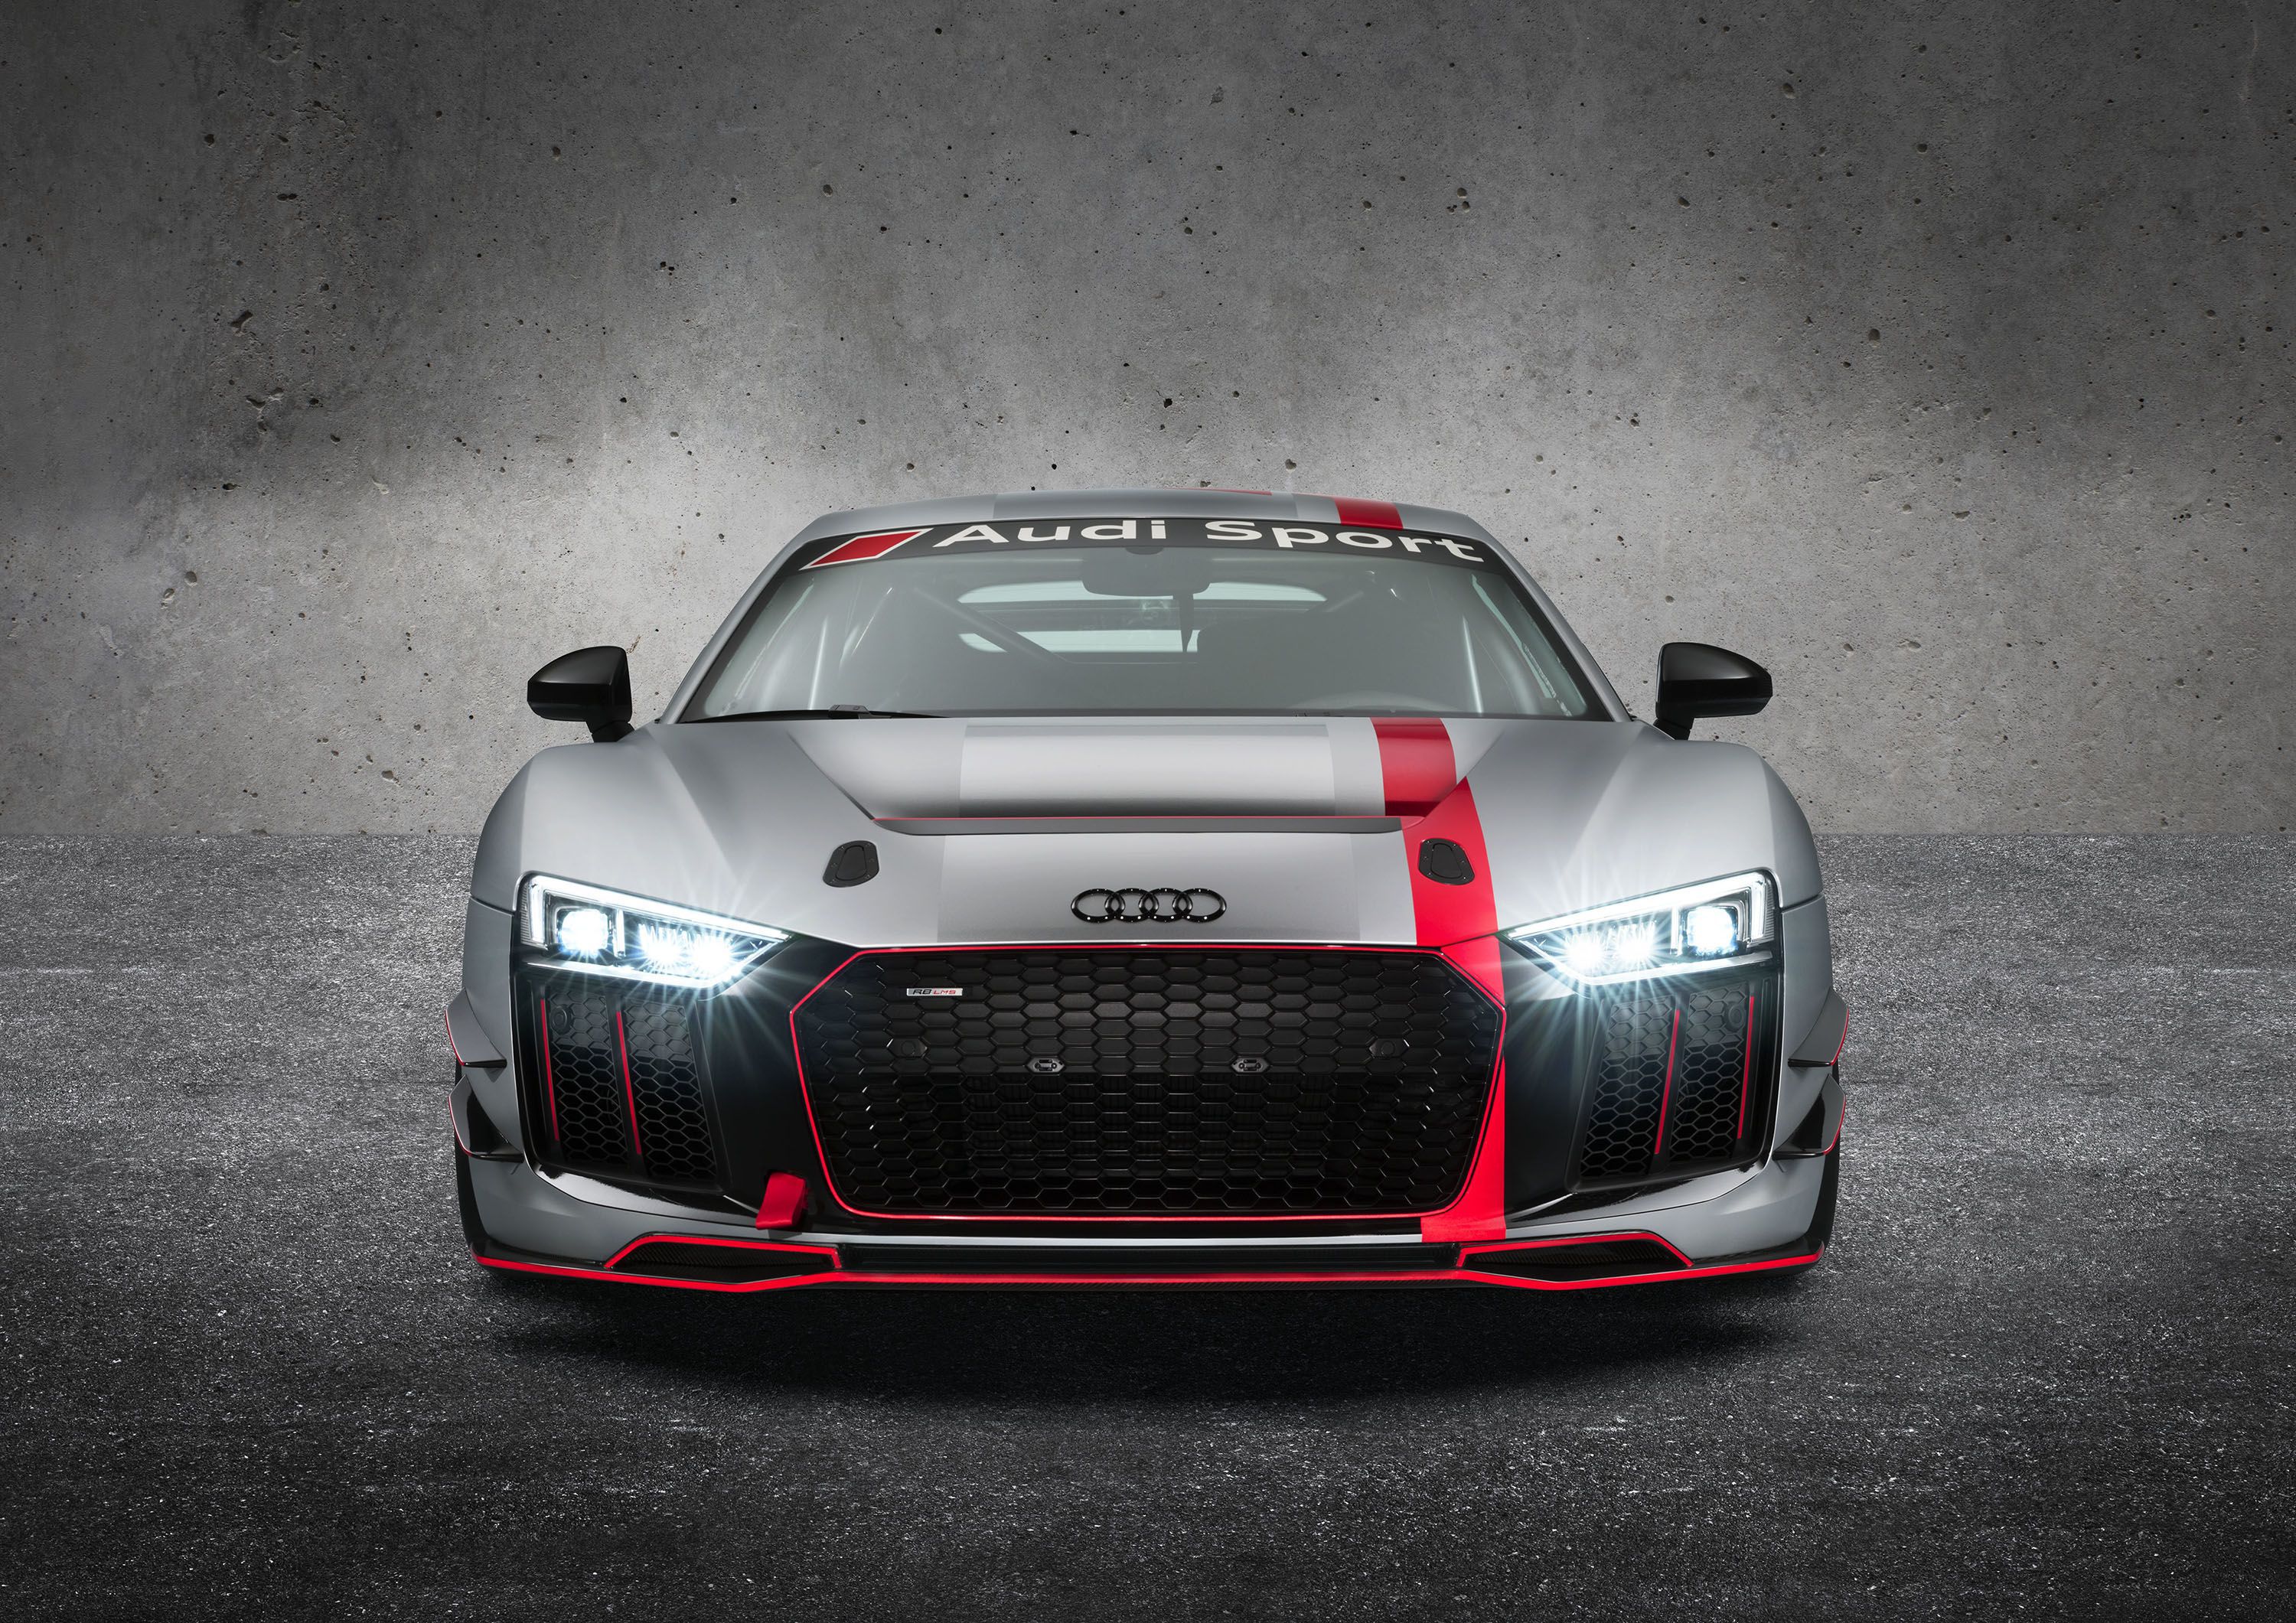 Audi R8 Lms Gt4, HD Cars, 4k Wallpapers, Images ...